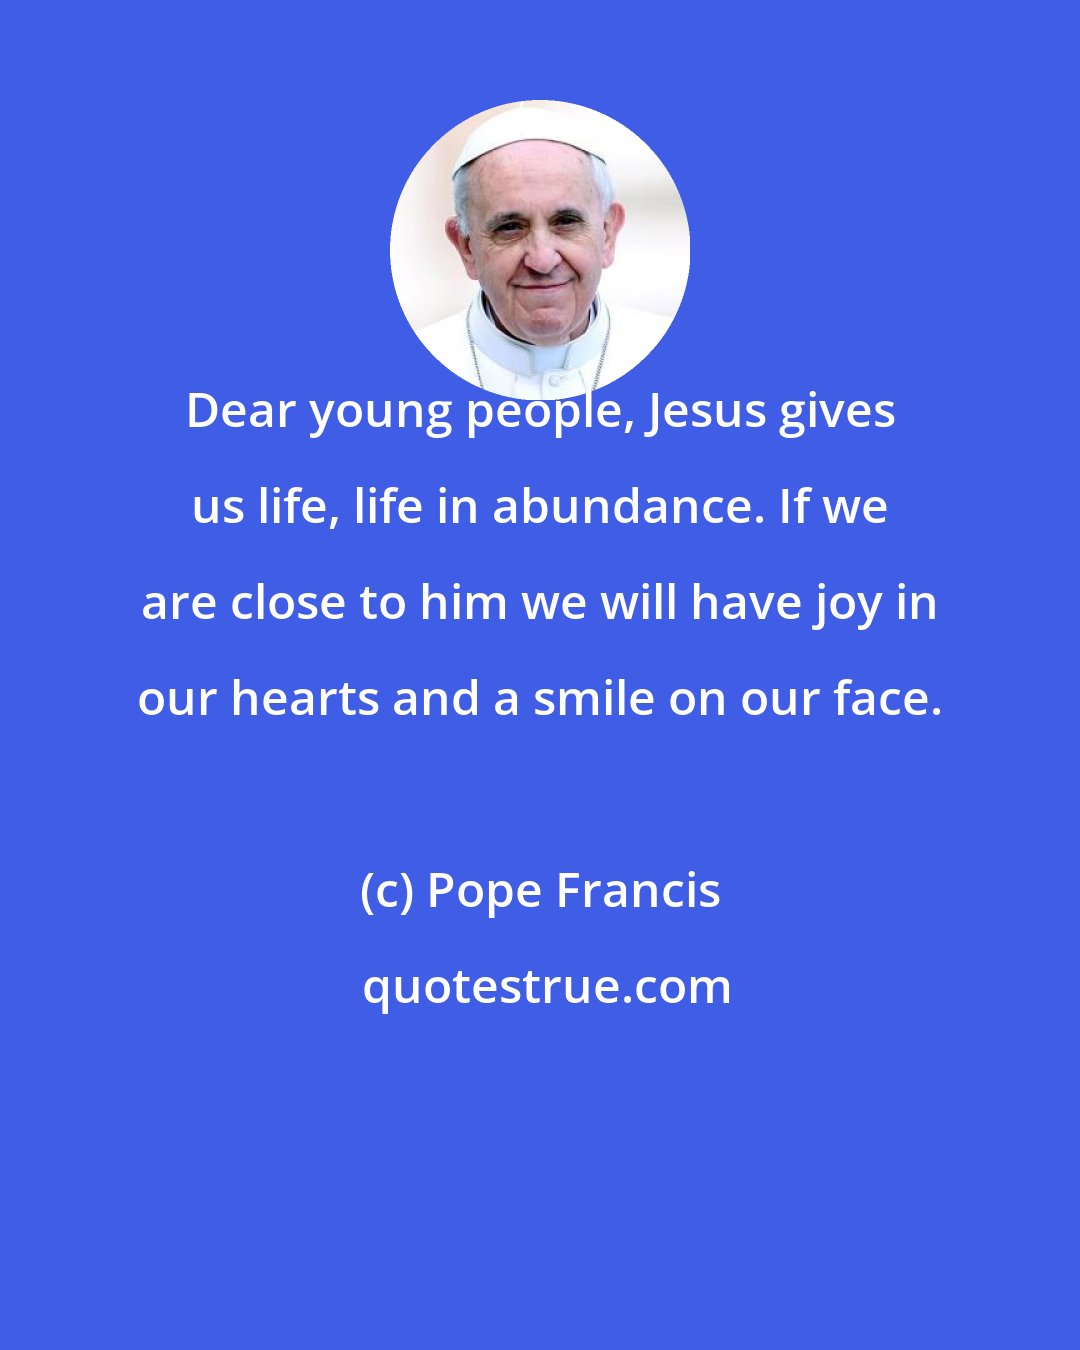 Pope Francis: Dear young people, Jesus gives us life, life in abundance. If we are close to him we will have joy in our hearts and a smile on our face.